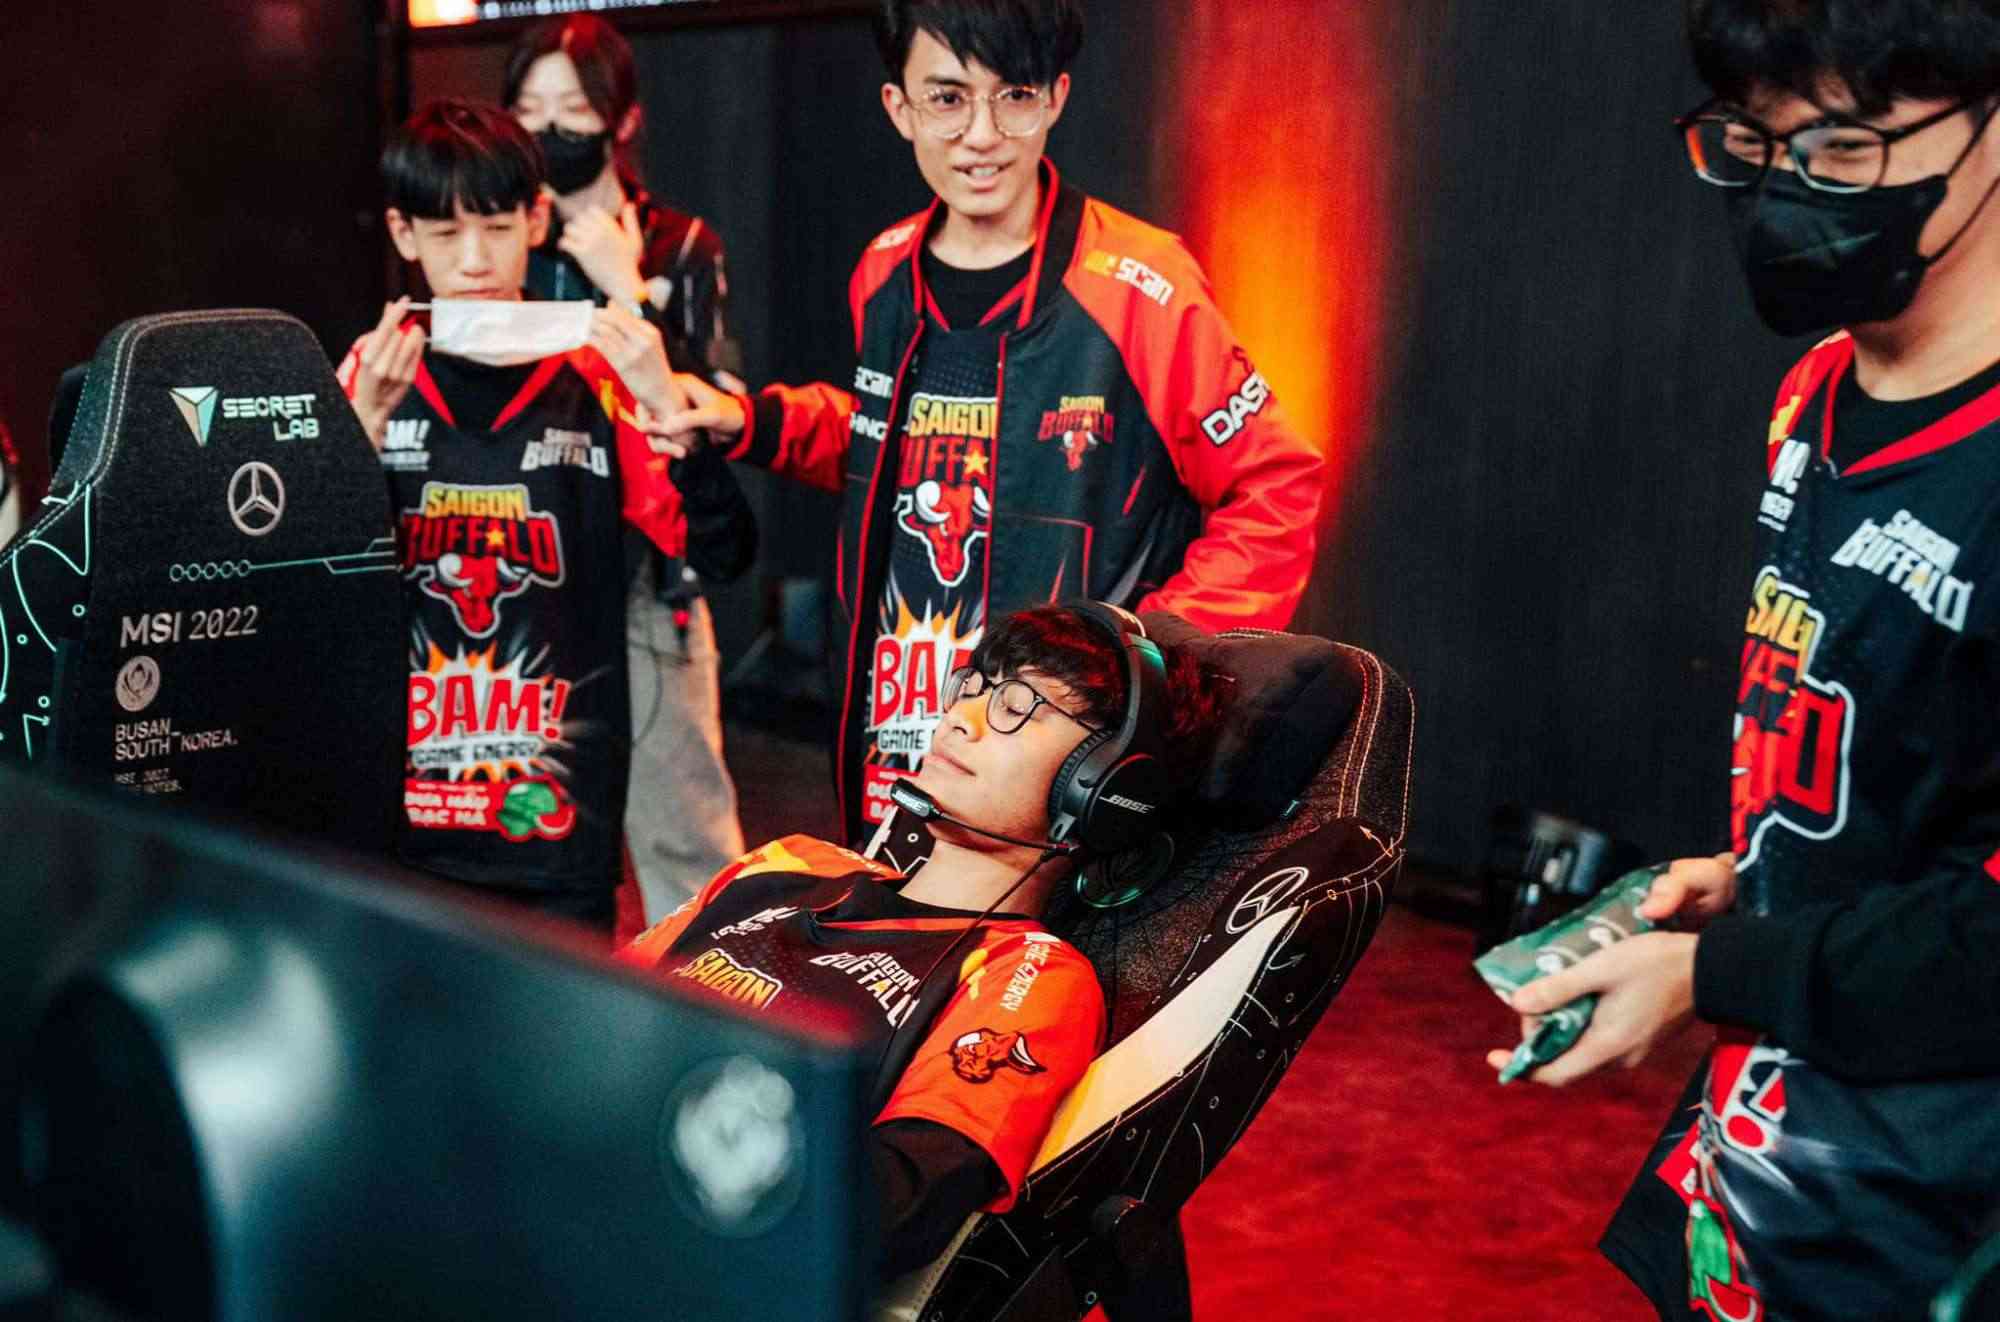 Saigon Buffalo announced that BeanJ and Shogun had “passed” the Visa, only “Mr Frog Mr. Ren” was missing.